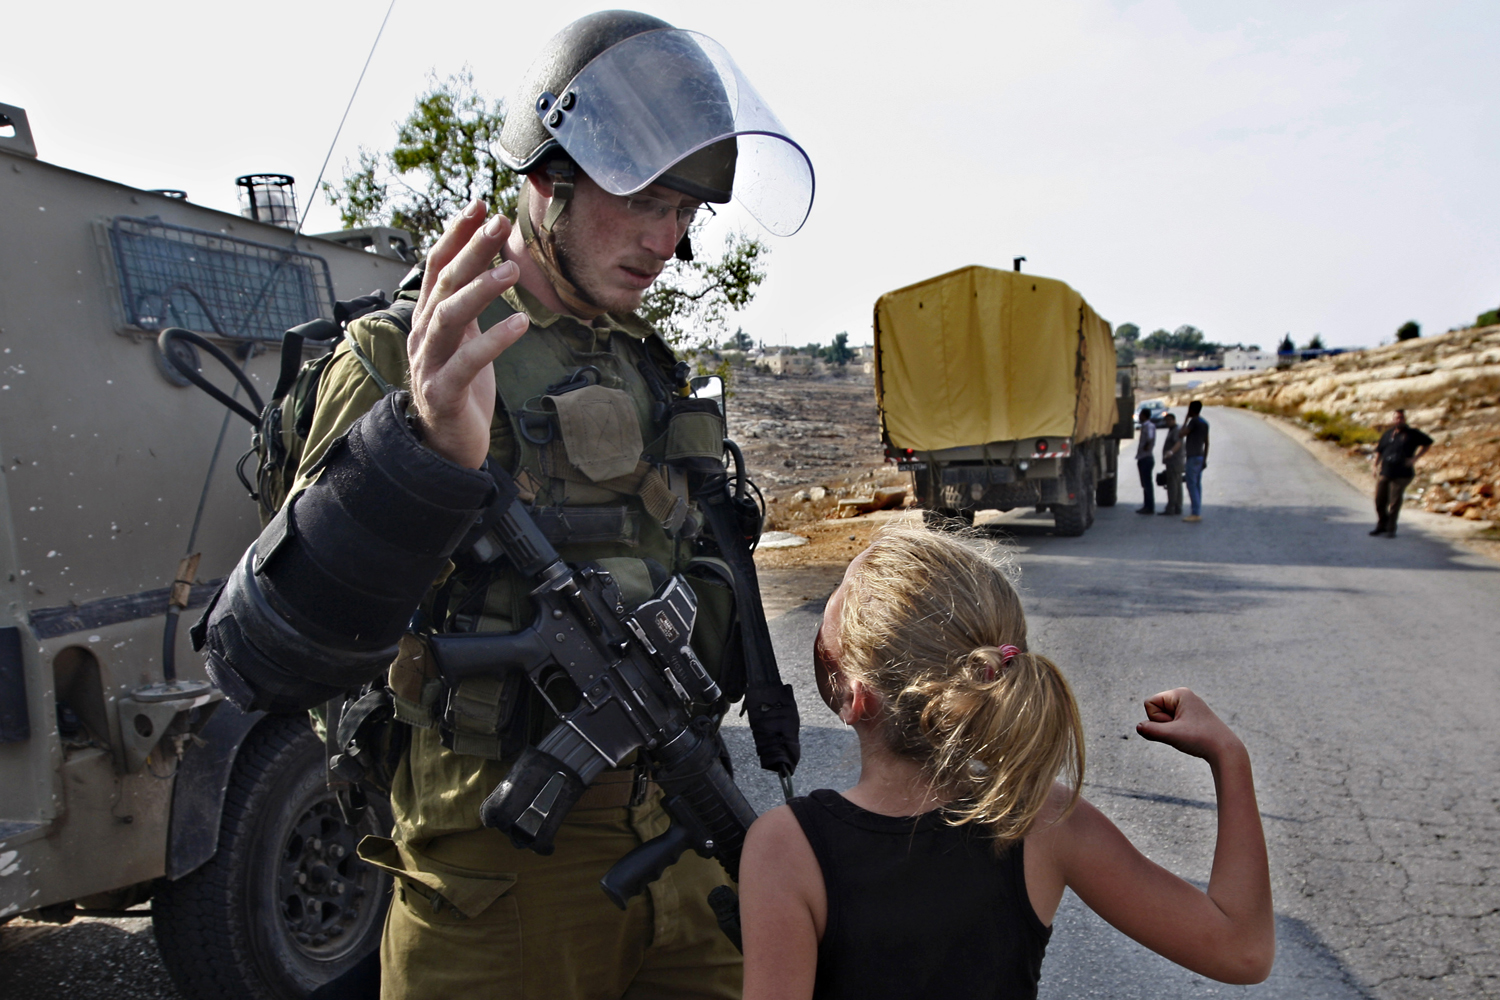 Image: Nov. 2, 2012. A Palestinian girl tries to punch an Israeli soldier during a protest against the expansion of the nearby Jewish settlement of Halamish, in the West Bank village of Nabi Saleh near Ramallah.